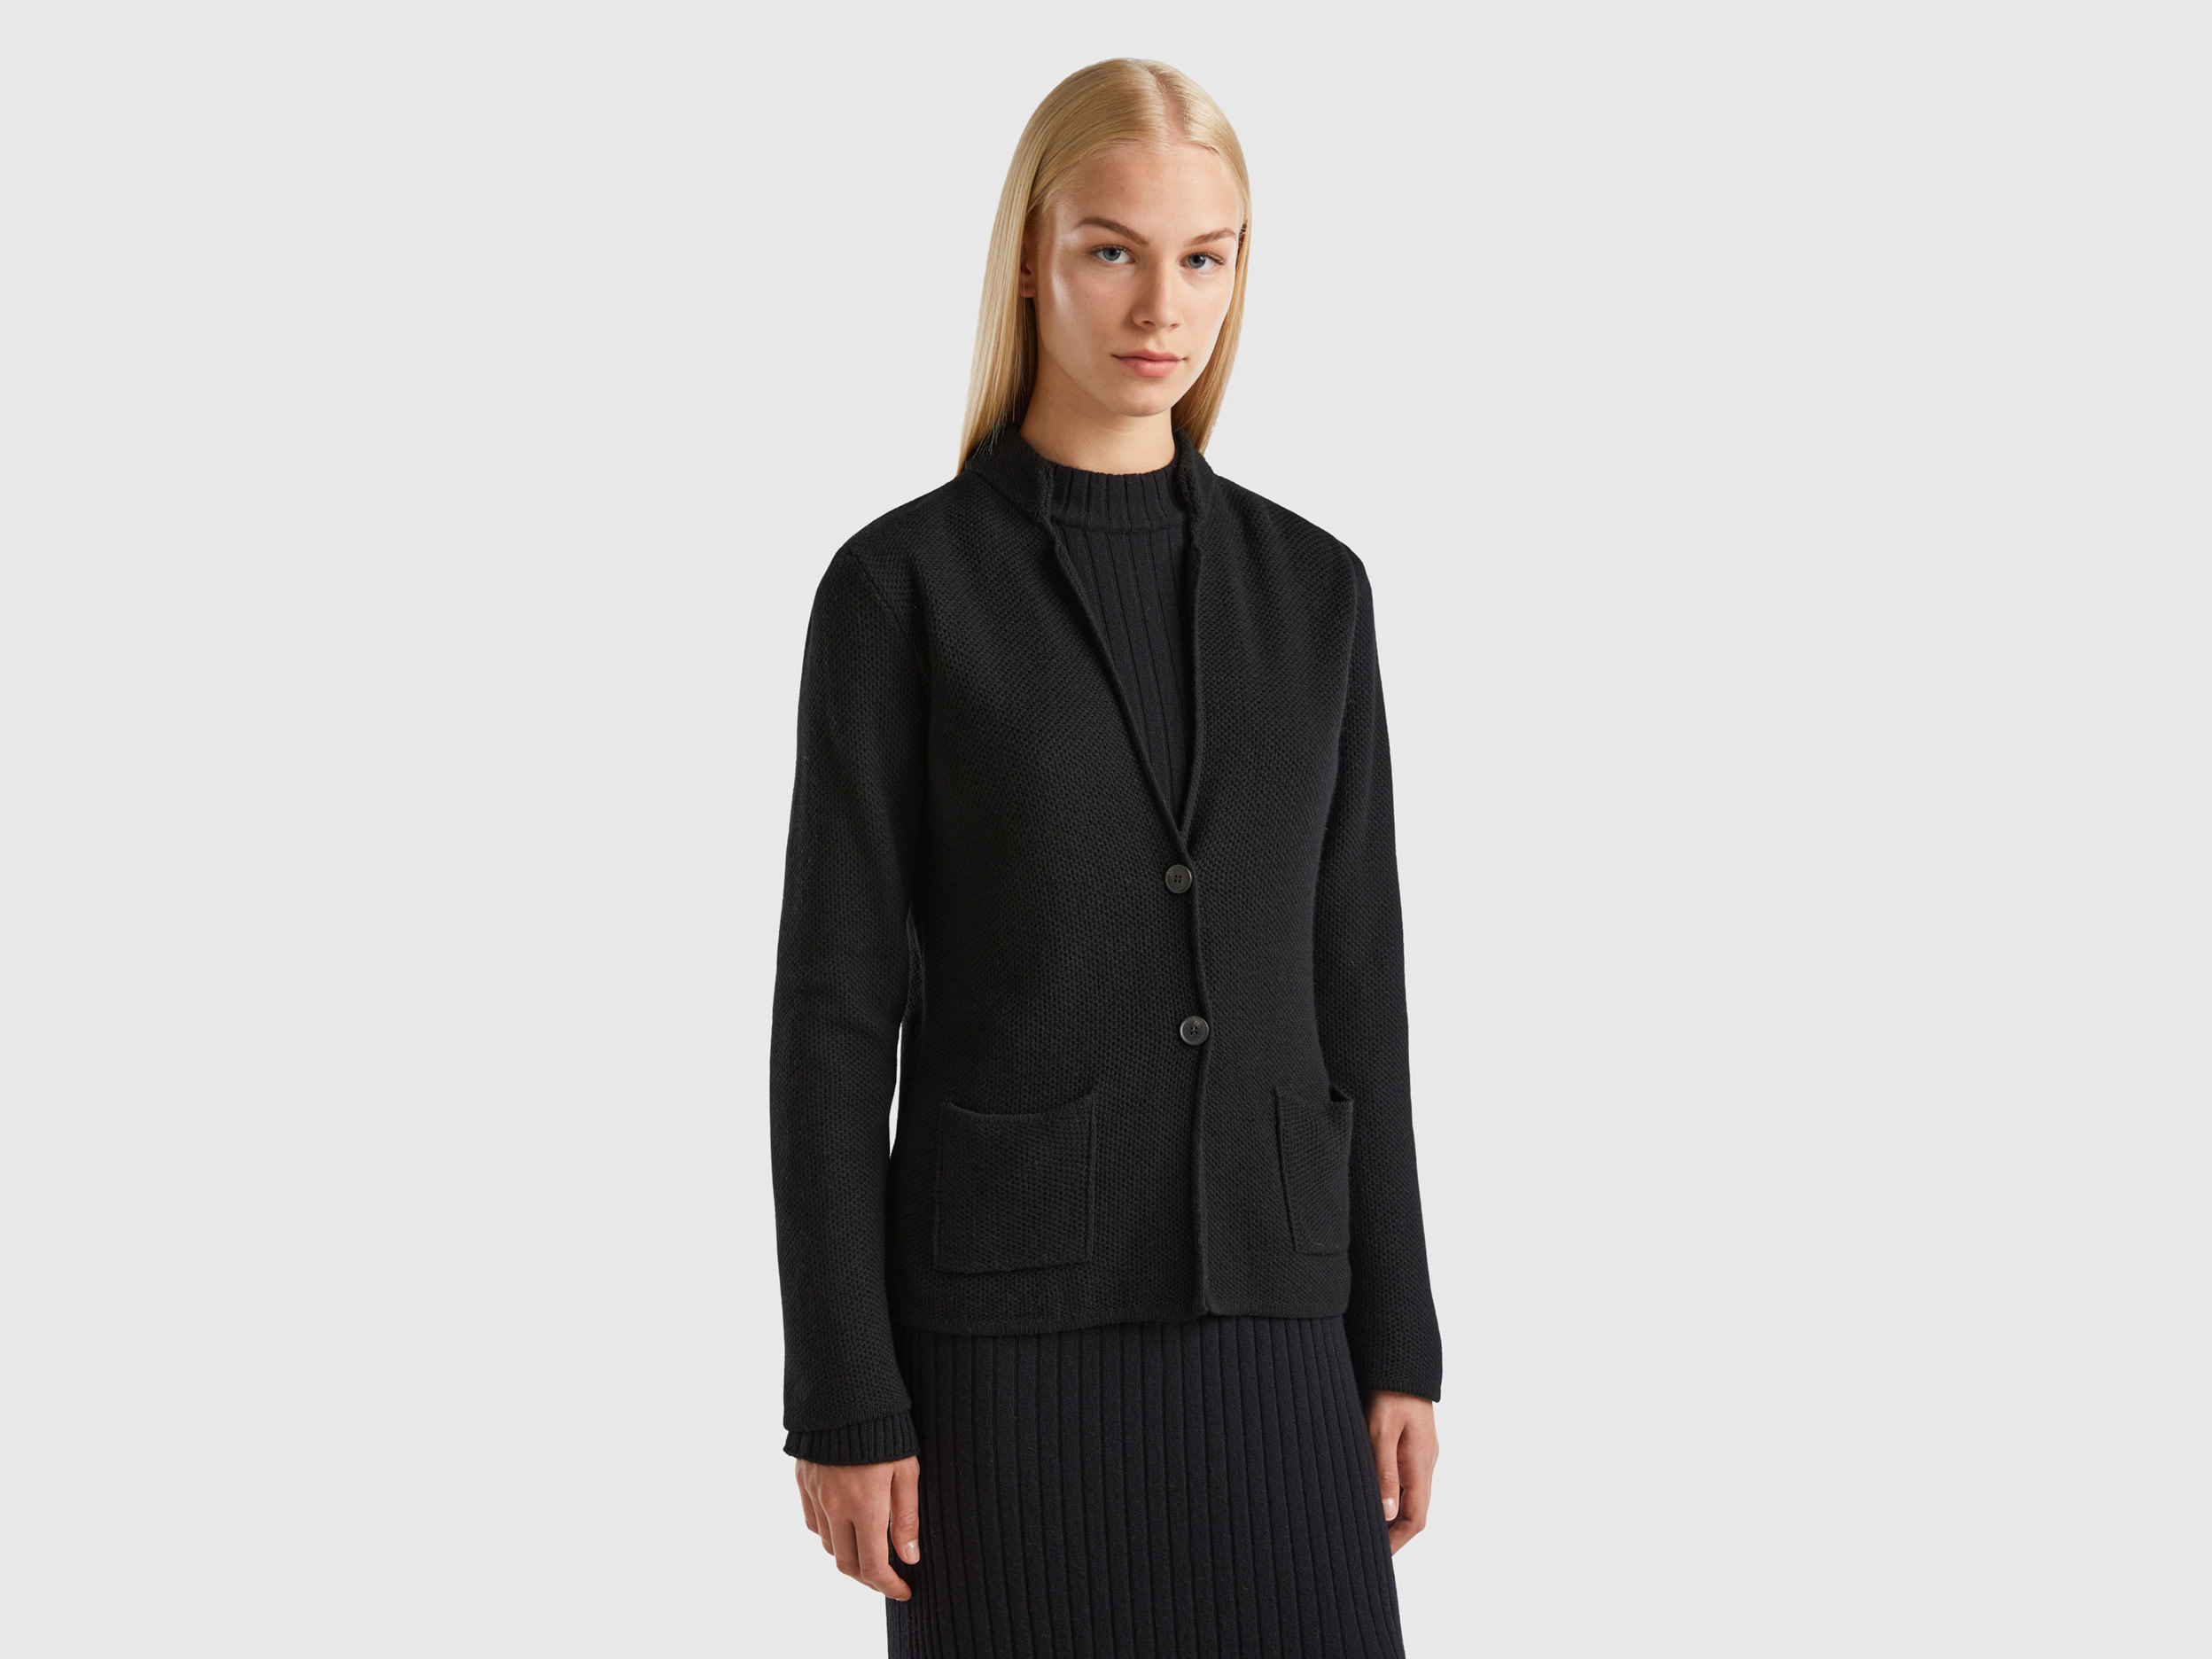 Benetton, Knit Jacket In Wool And Cashmere Blend, size M, Black, Women